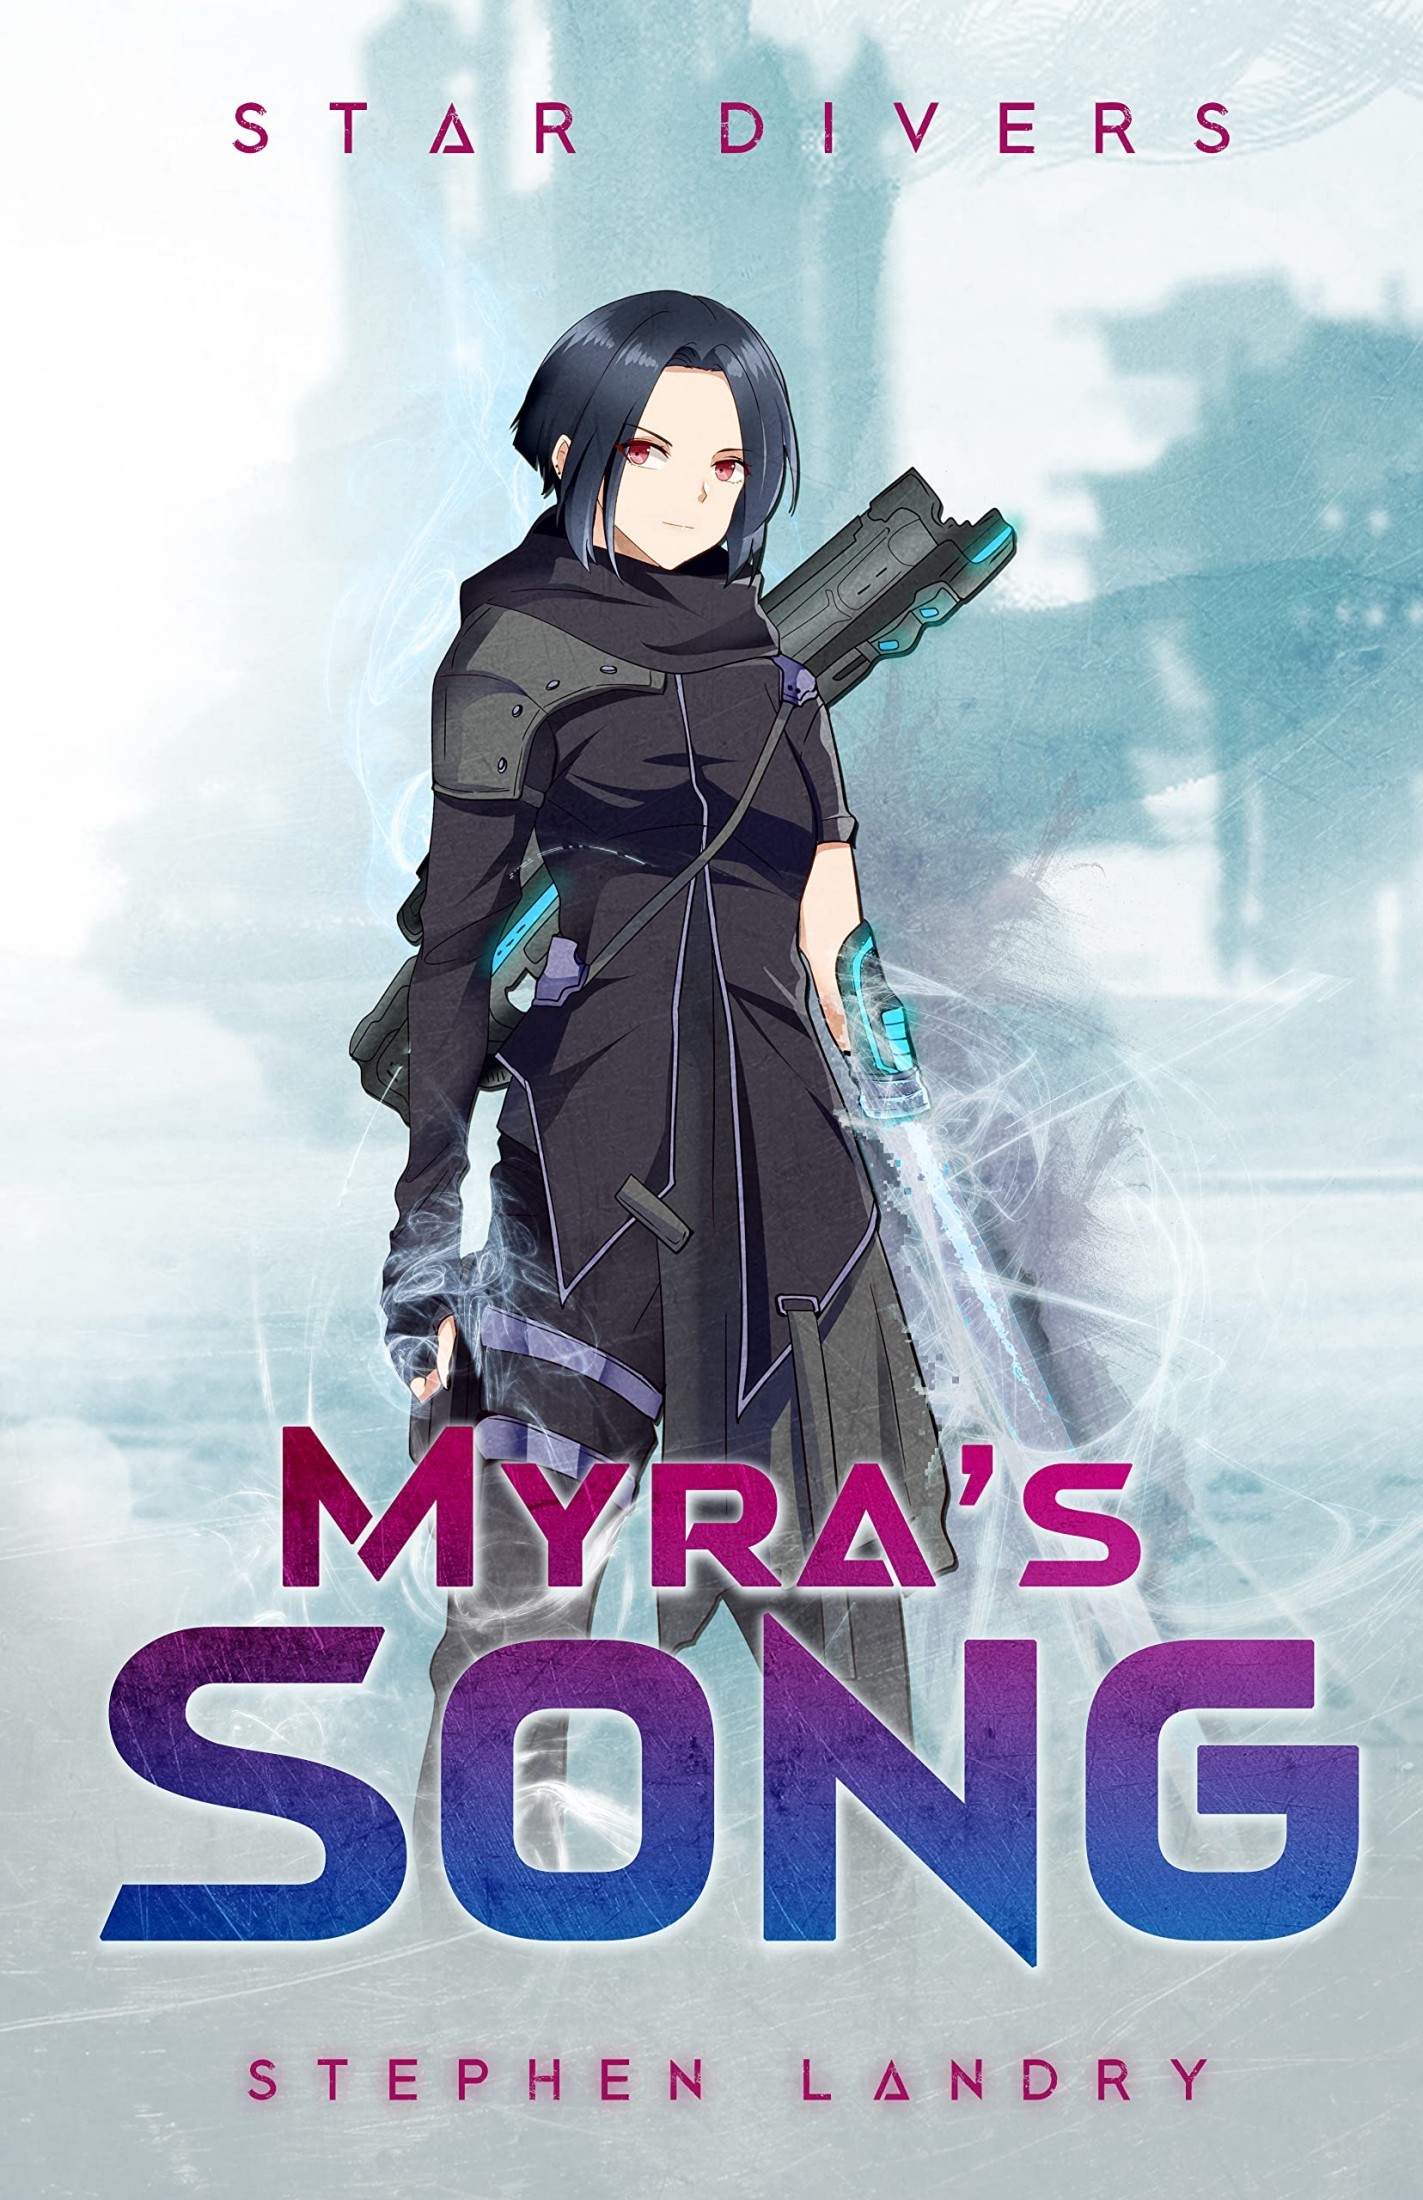 Star Divers: Myra's Song